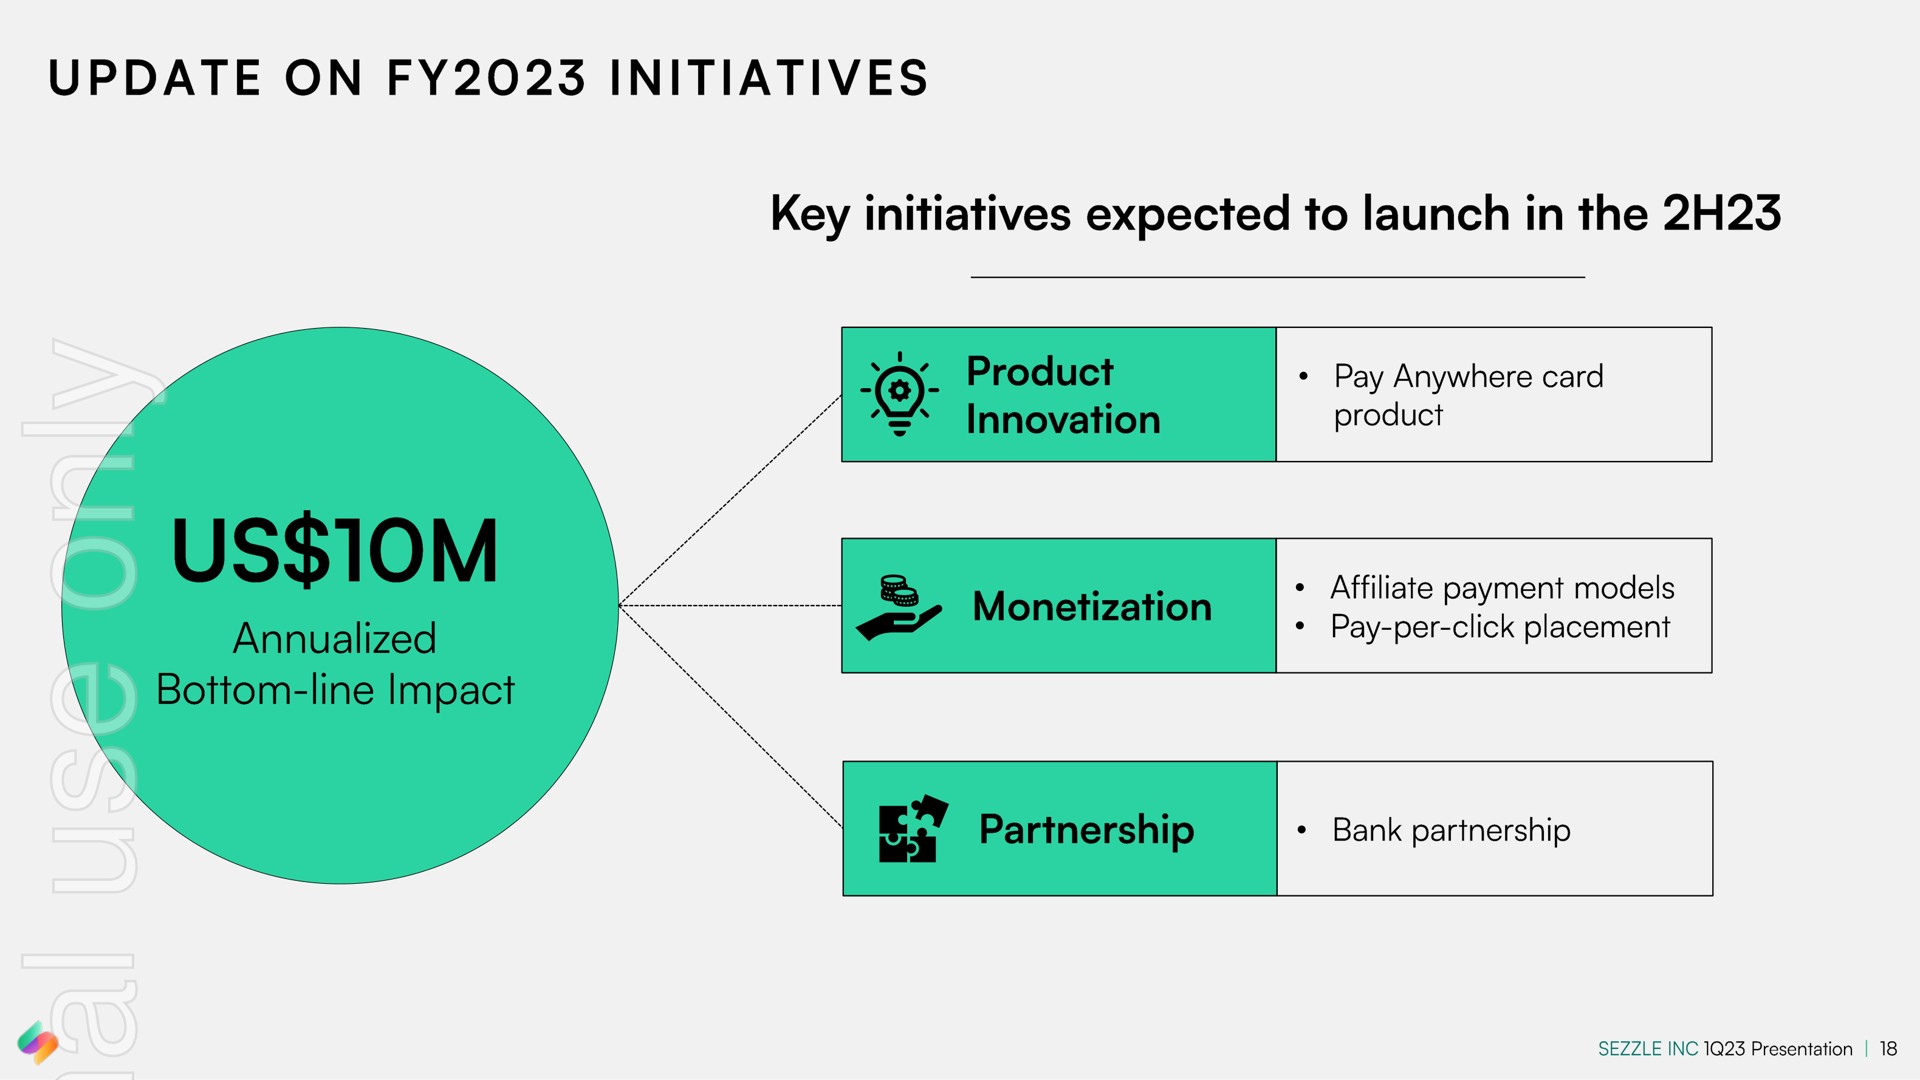 a key initiatives expected to launch in the update on initiatives | Sezzle